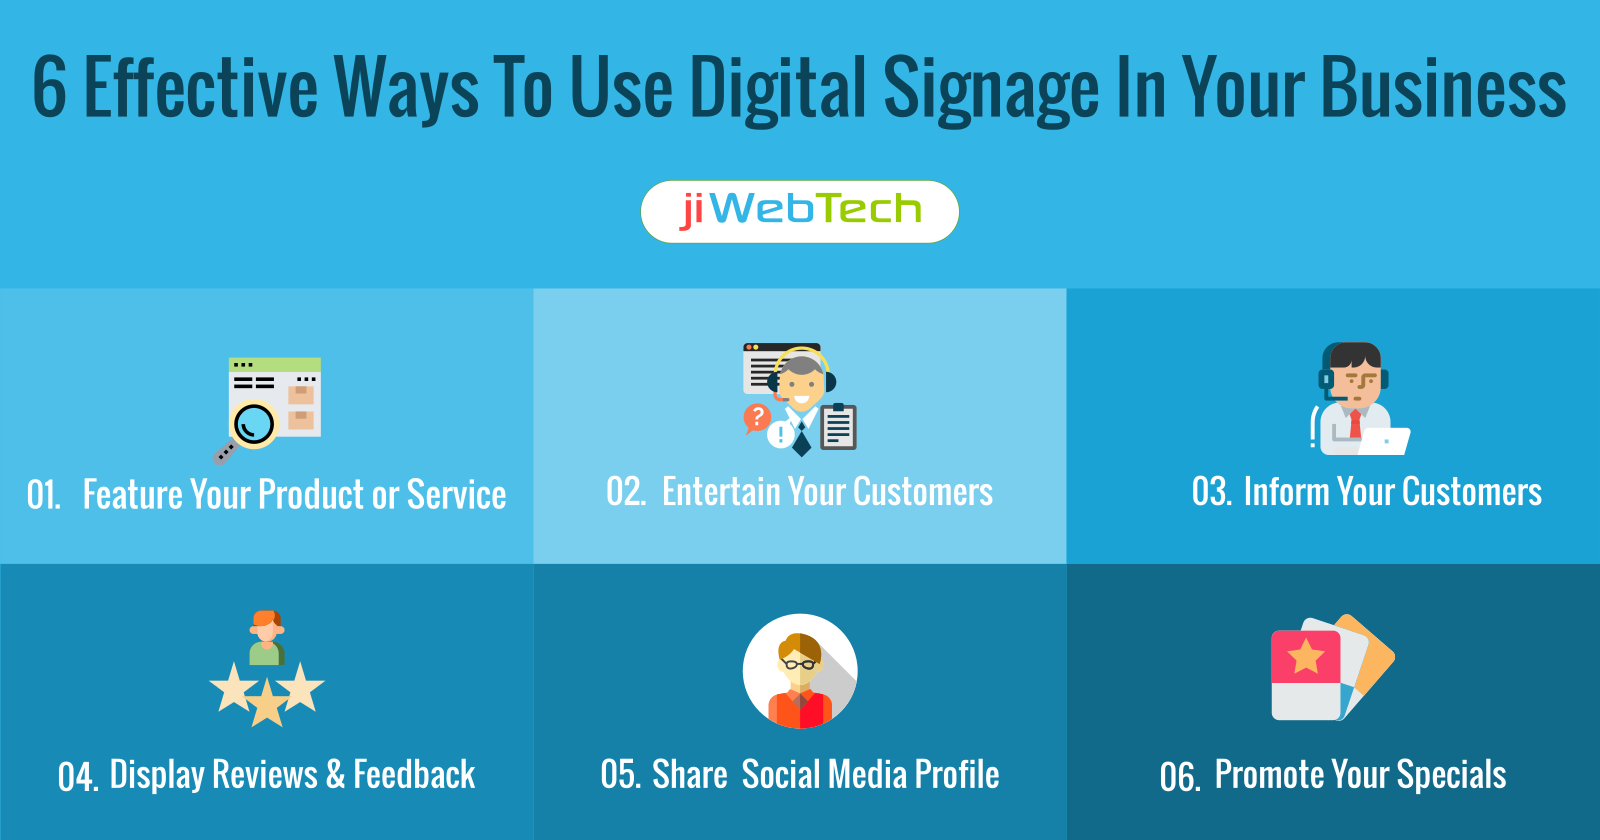 6 Effective Ways To Use Digital Signage In Your Business